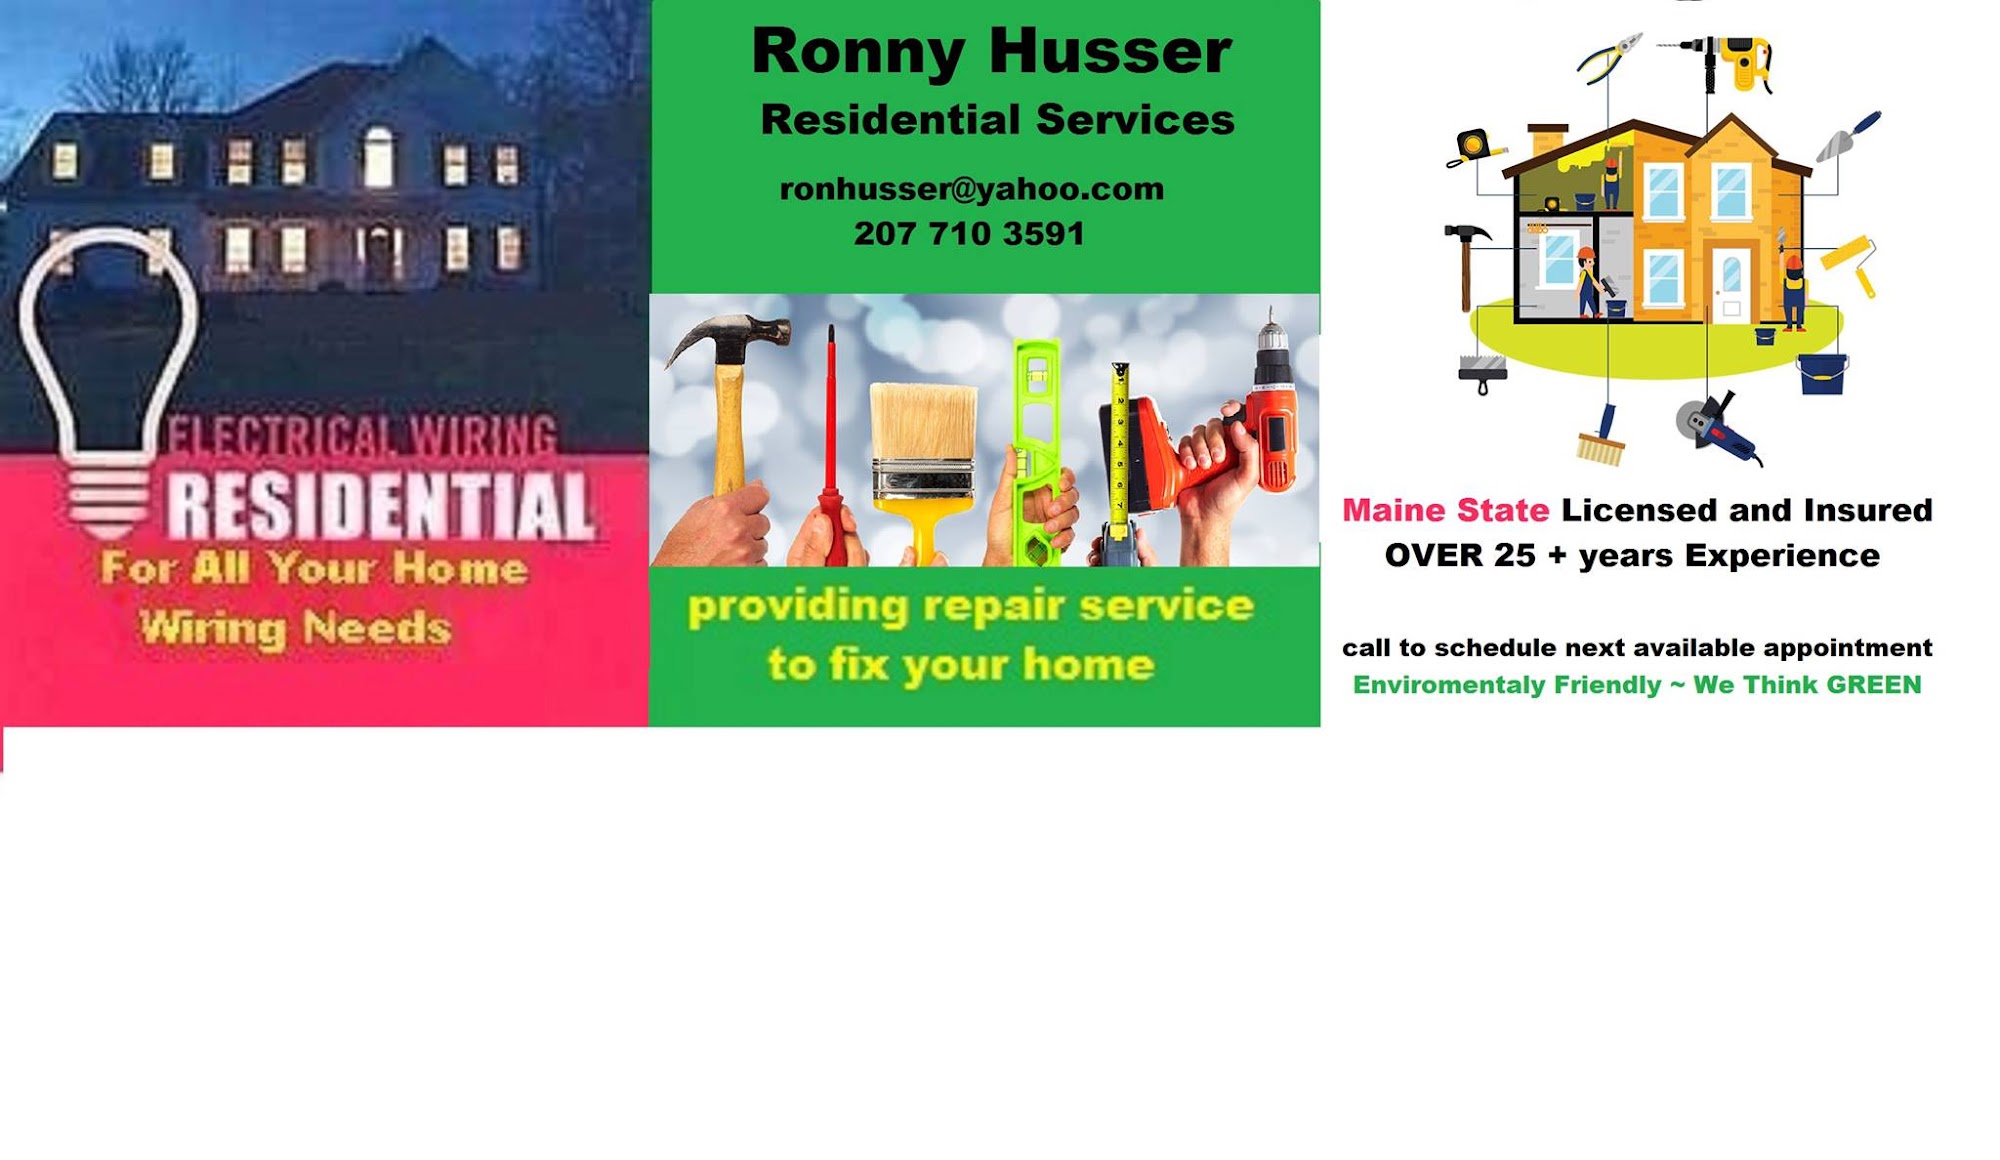 Ron Husser *Residential Services*